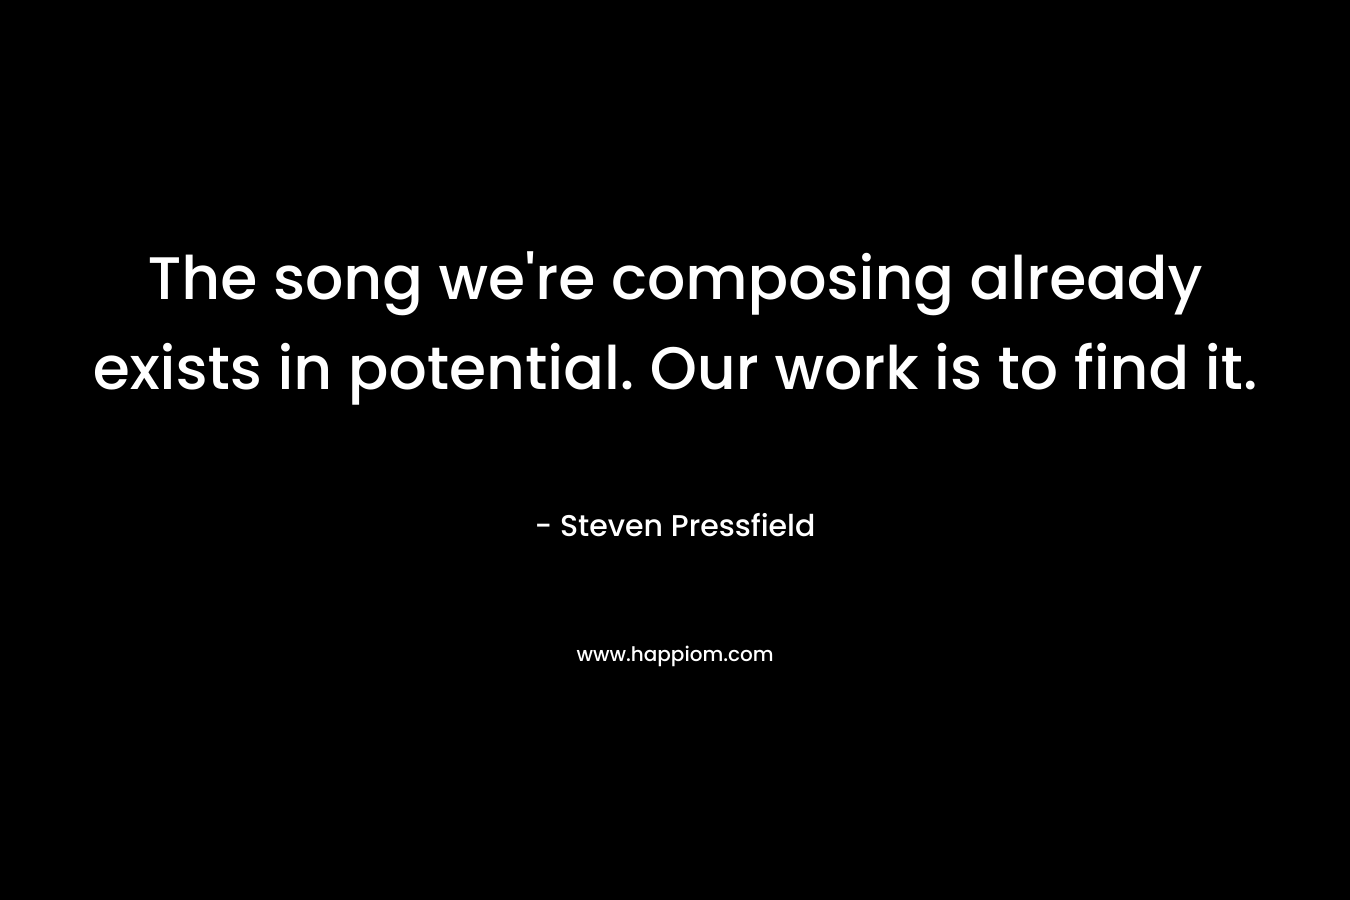 The song we're composing already exists in potential. Our work is to find it.